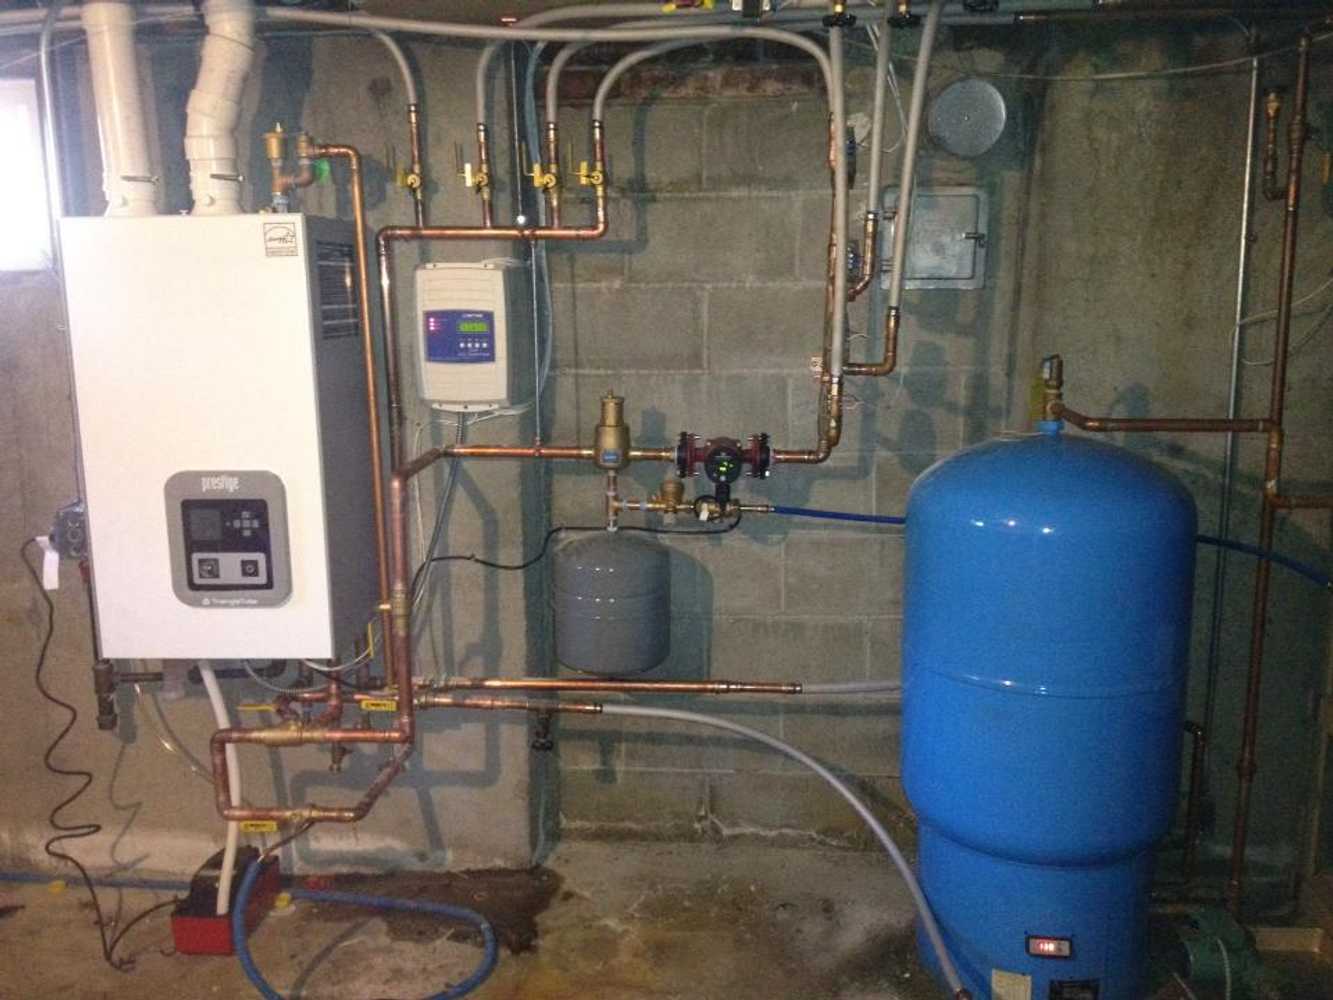 Mount Pleasant Plumbing & Heating Inc Projects